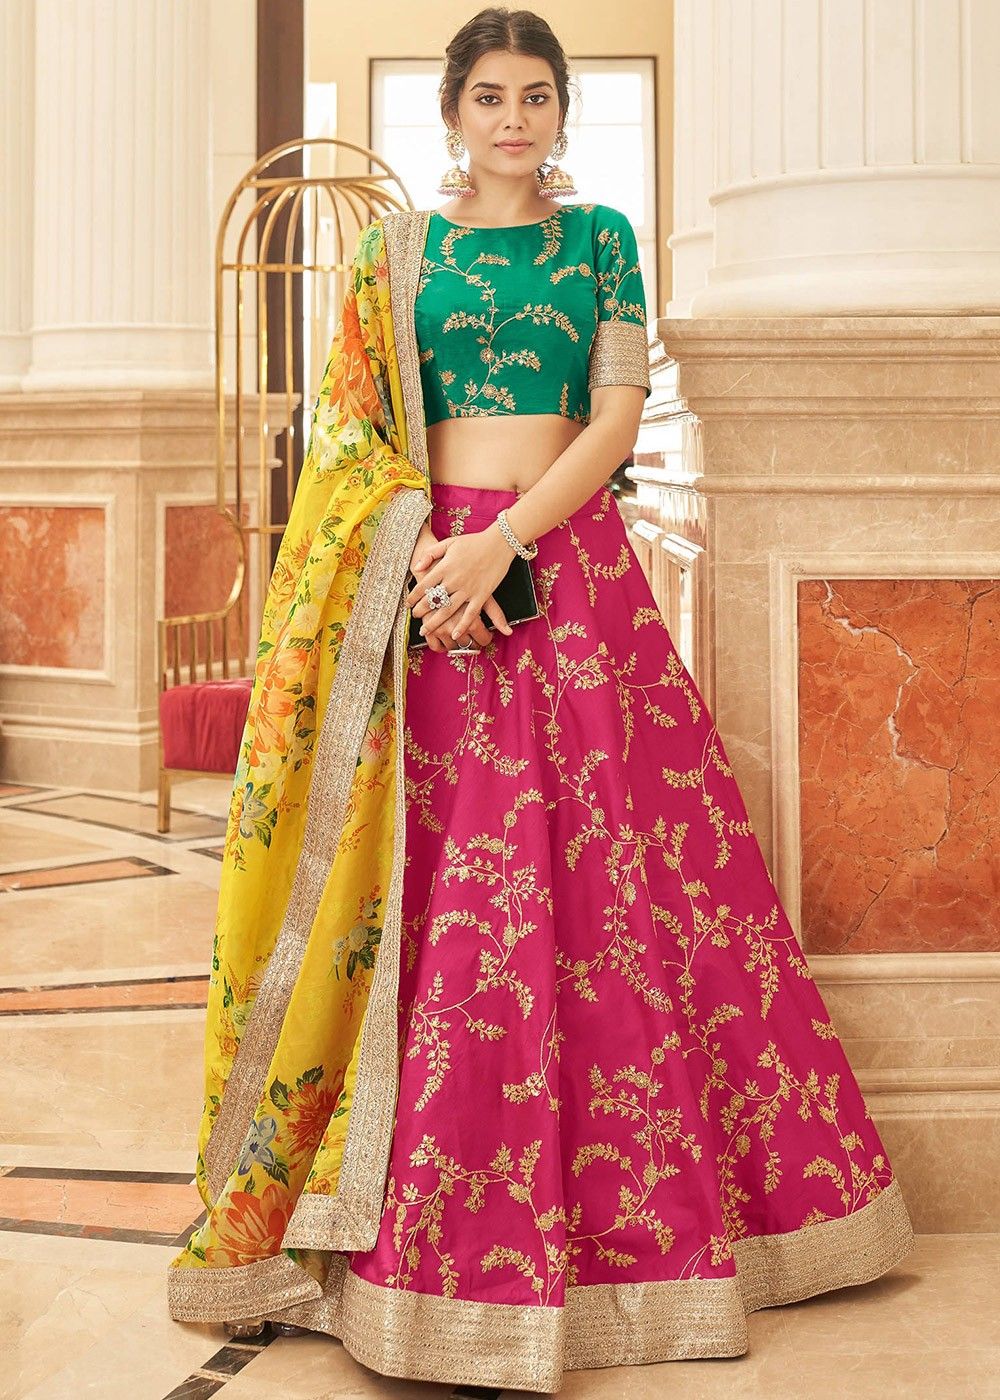 Divya's Pink Lehenga with Deep Green Blouse Is A Perfect Number To Rock  This Festive Season - HungryBoo | Pink lehenga, Deep green blouse, Teenage  dress